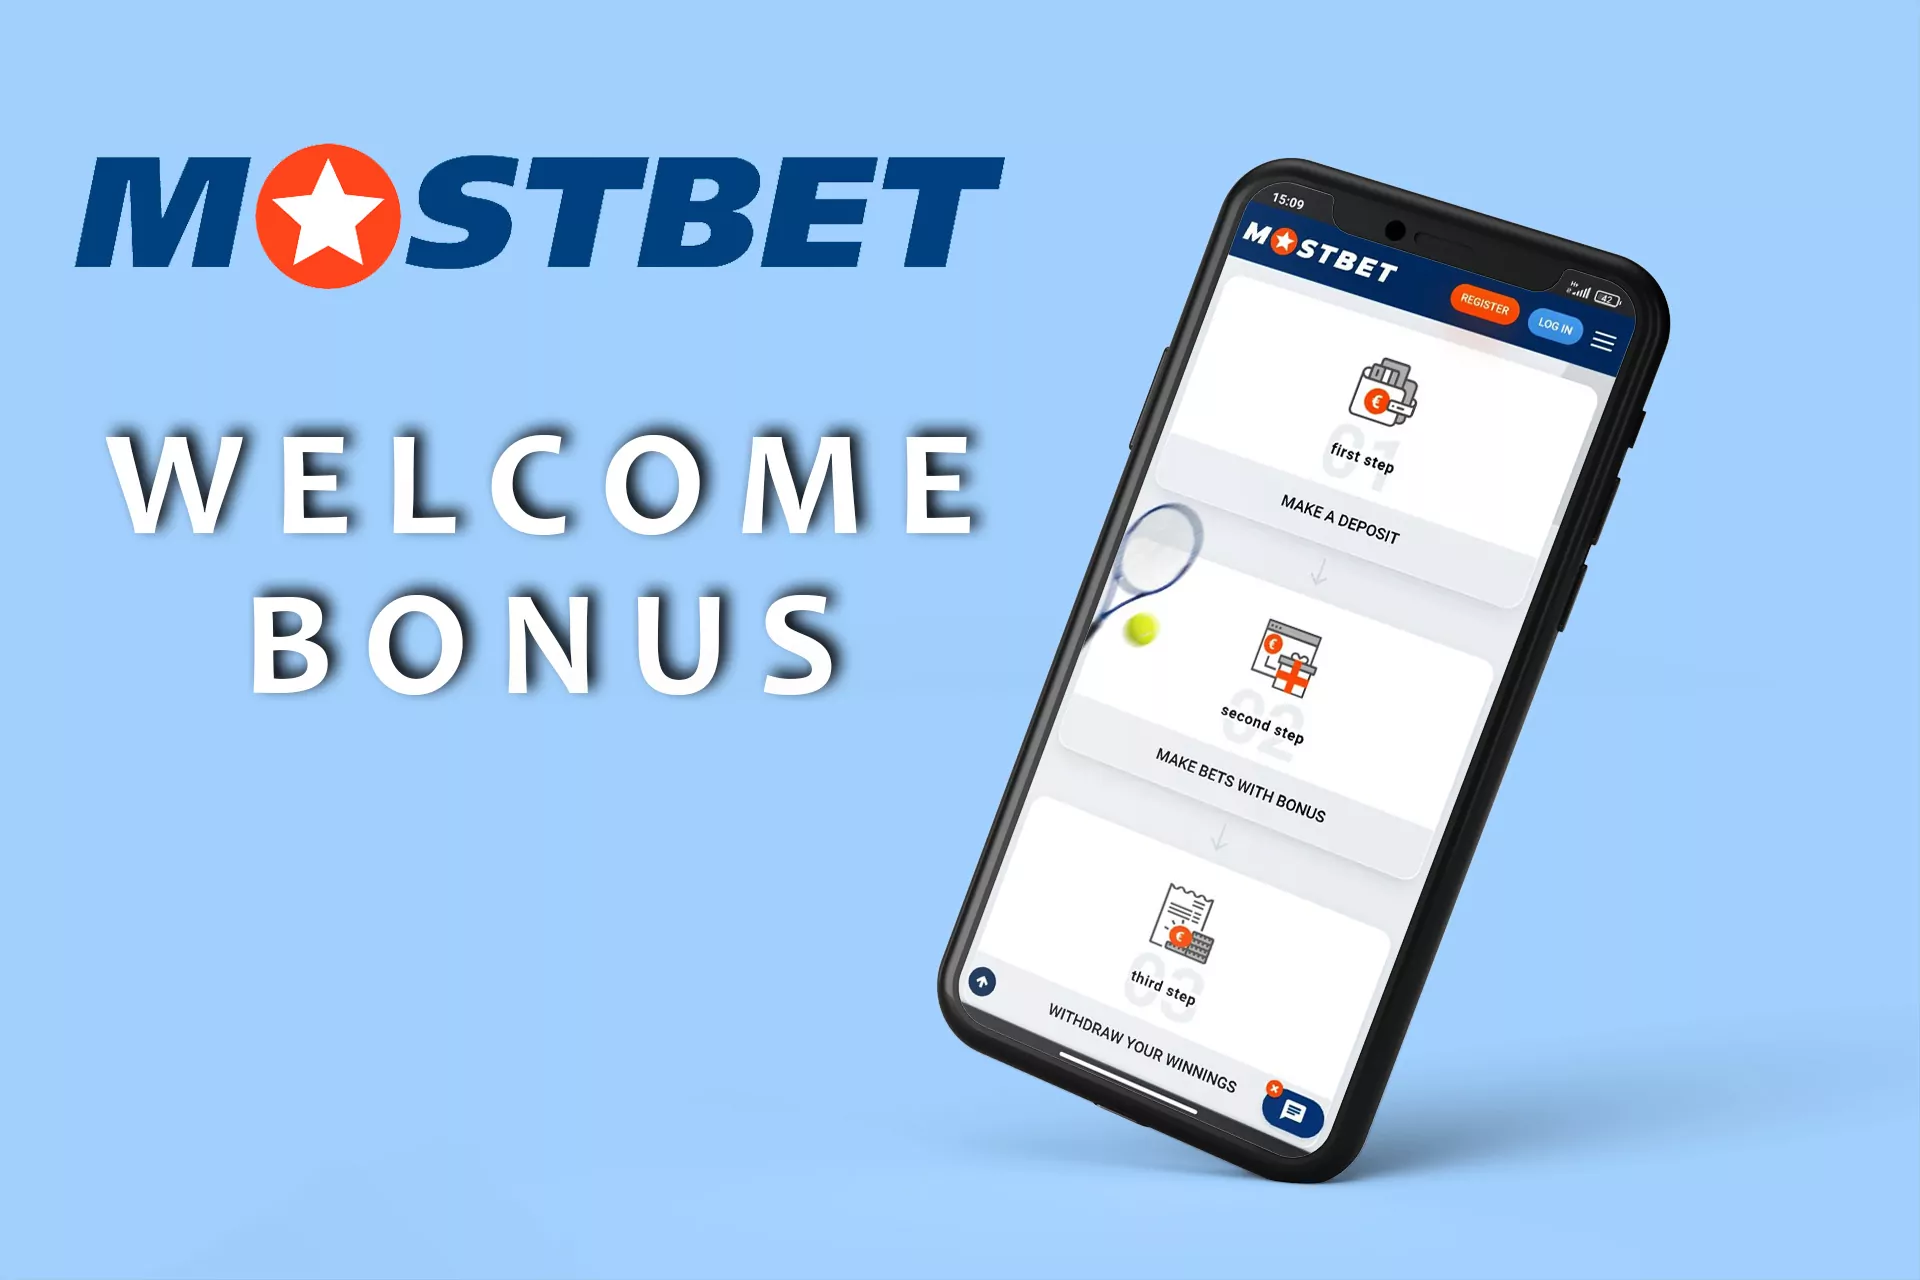 You will get a bonus right after the first deposit at Mostbet.